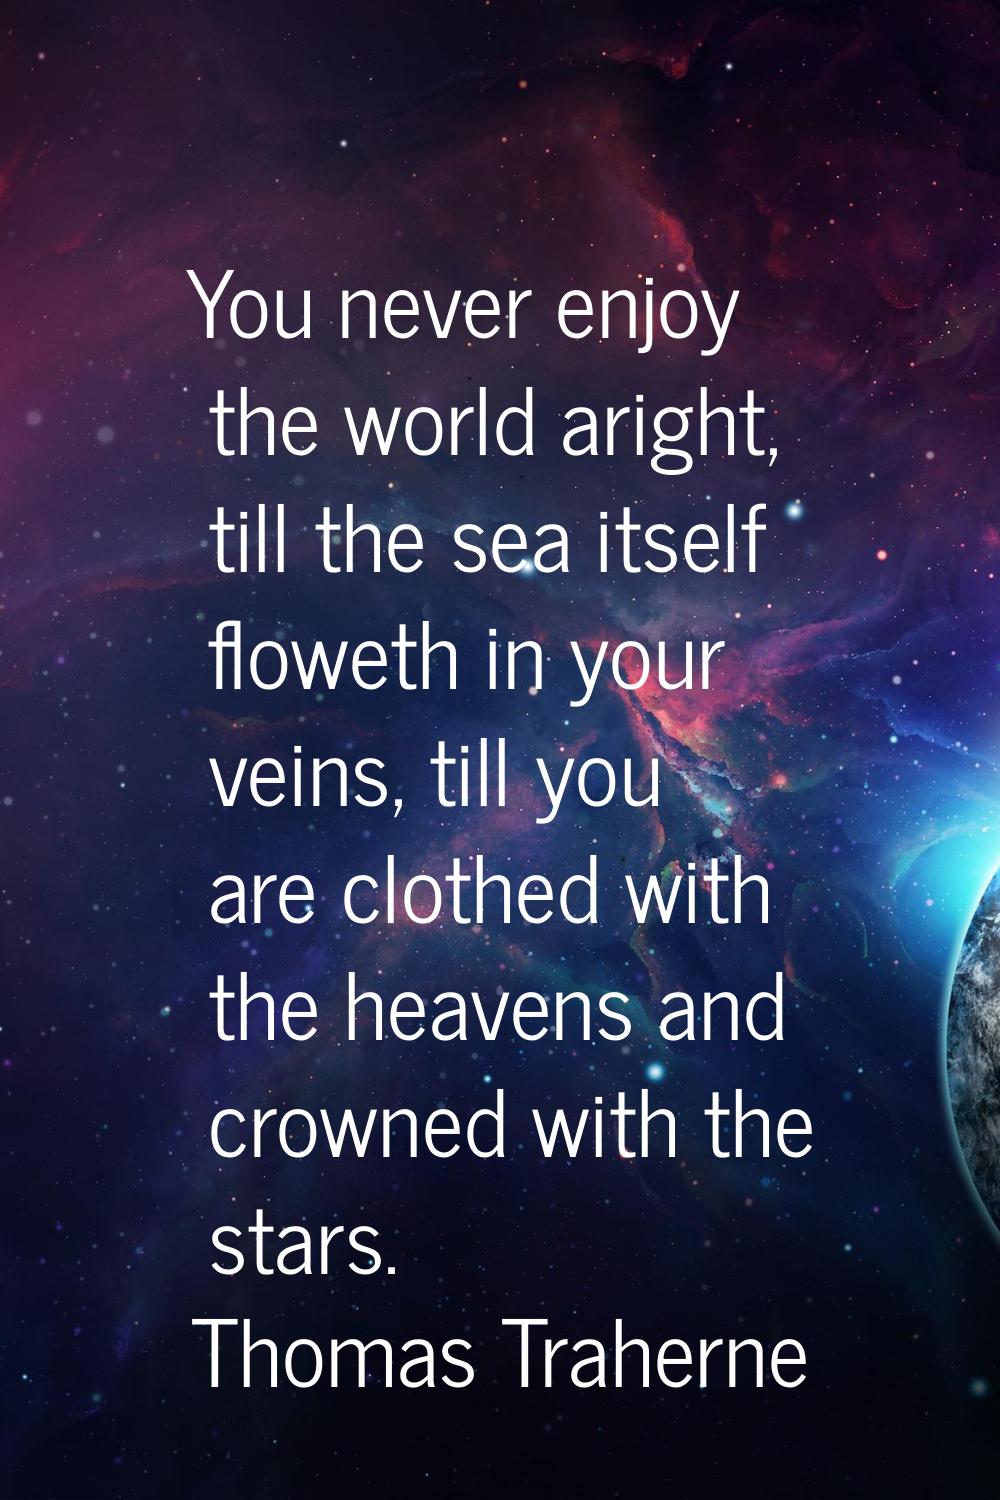 You never enjoy the world aright, till the sea itself floweth in your veins, till you are clothed w